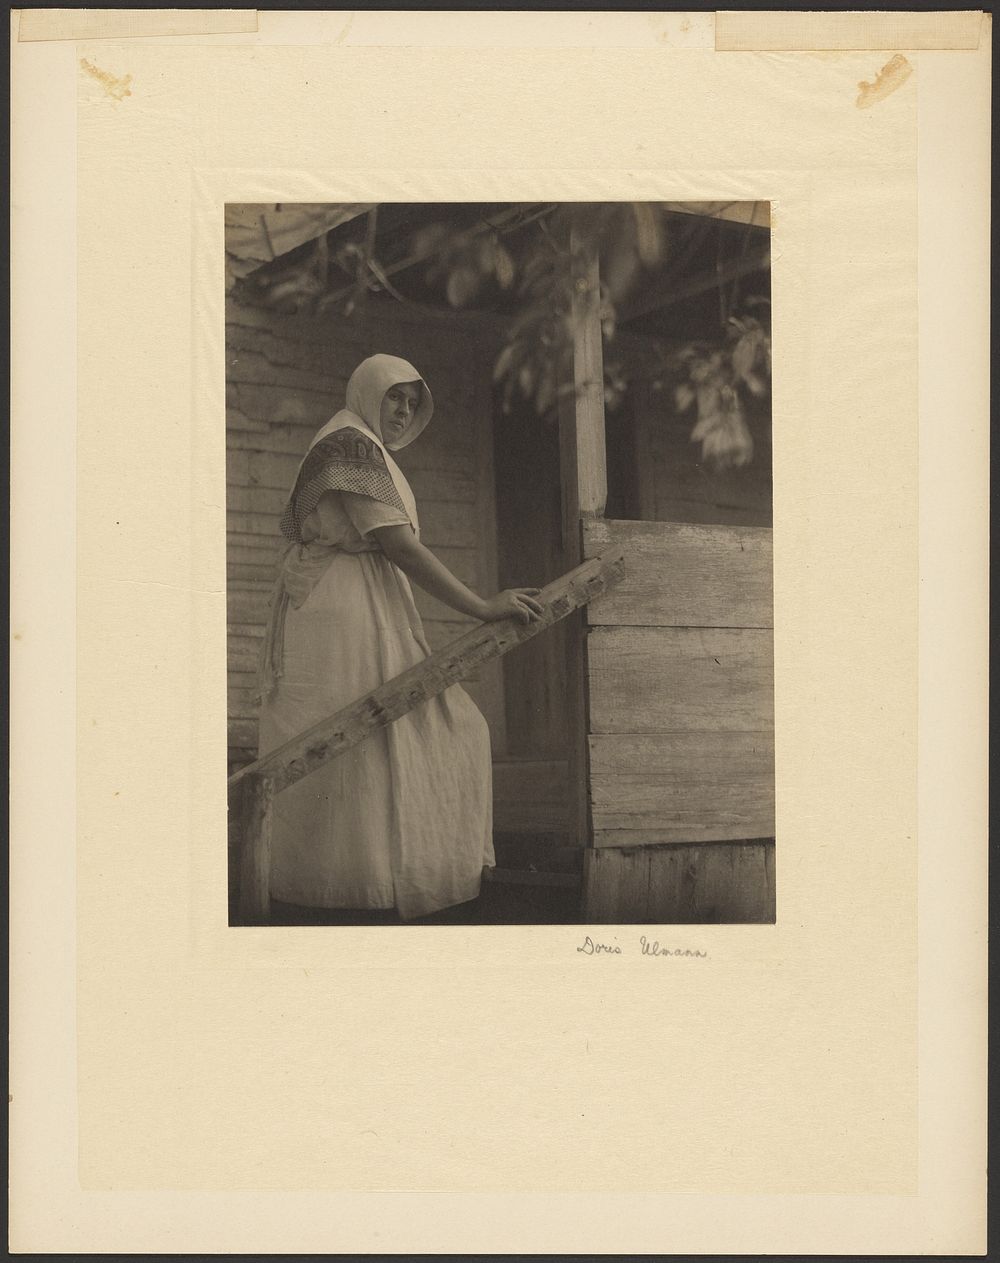 Young Woman Mounting Stairs by Doris Ulmann